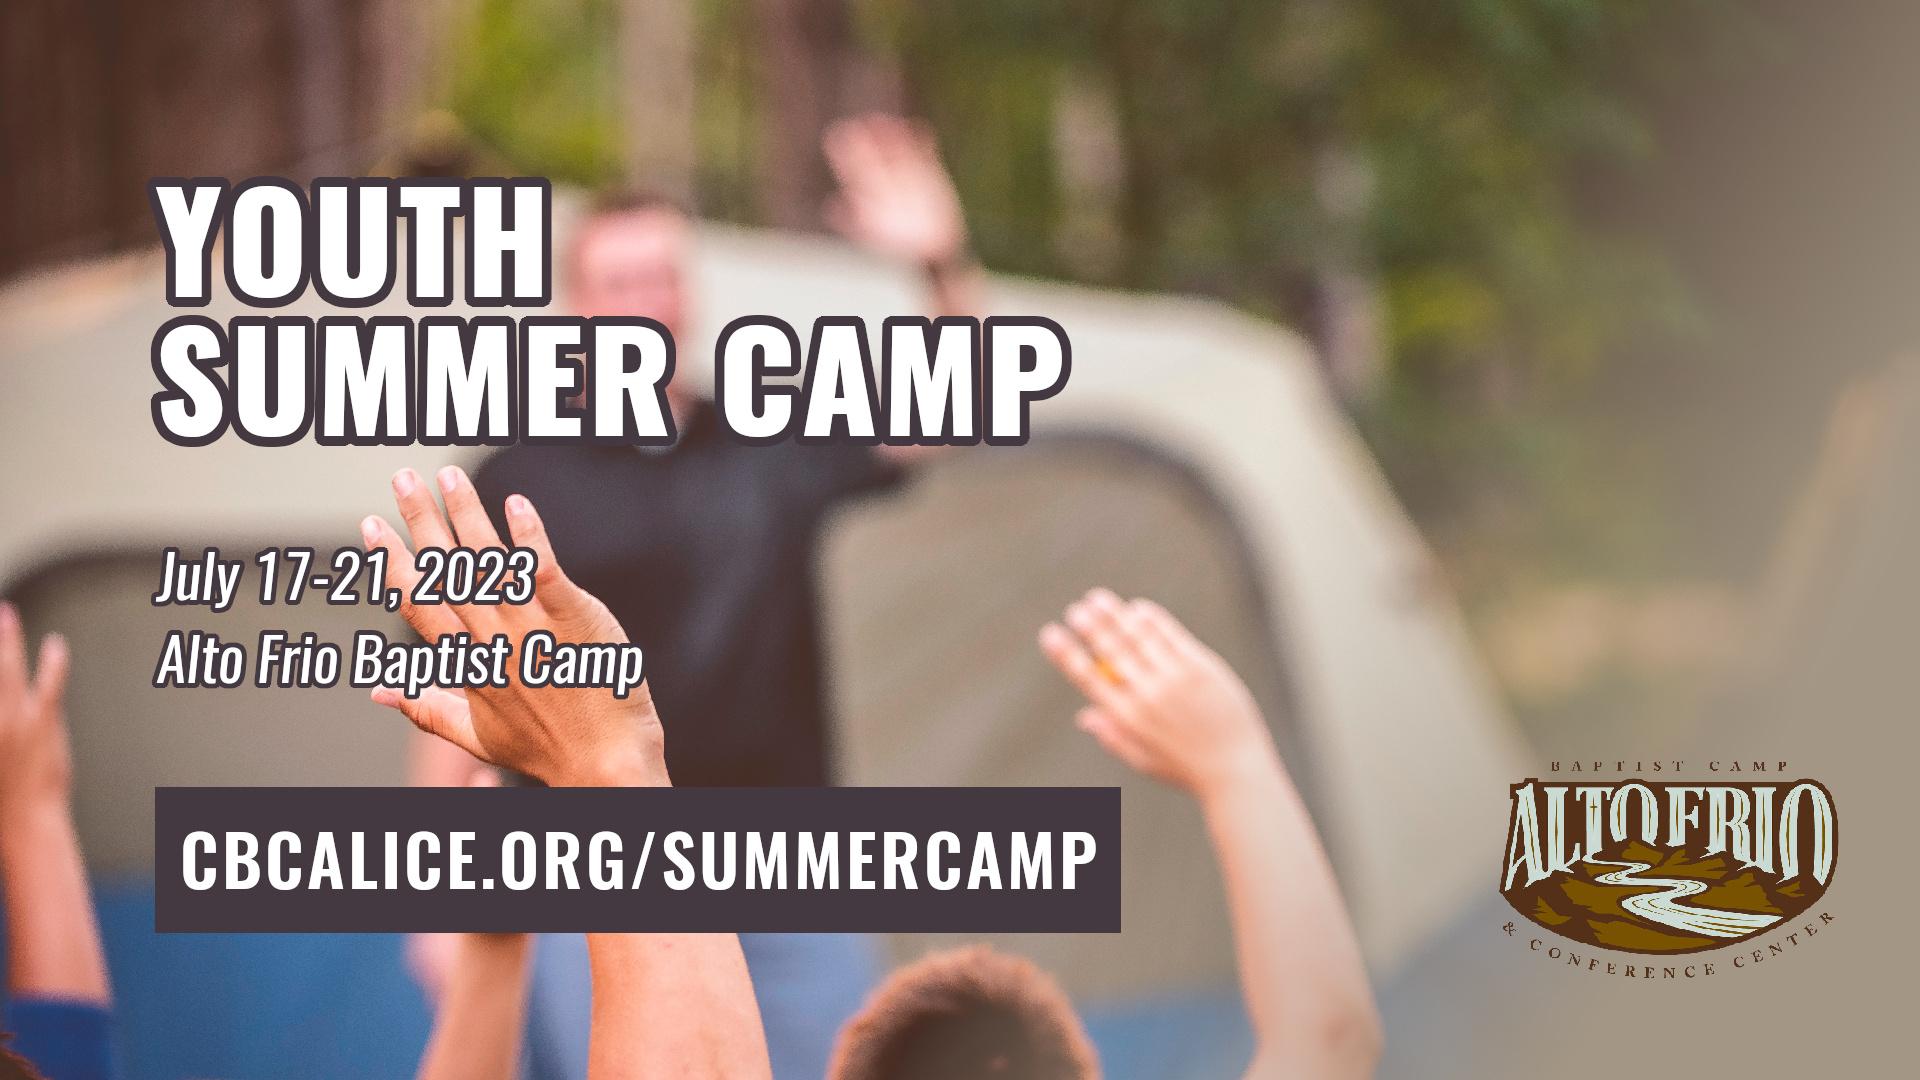 Youth Summer Camp at Alto Frio Baptist Camps on July 17-21, 2023